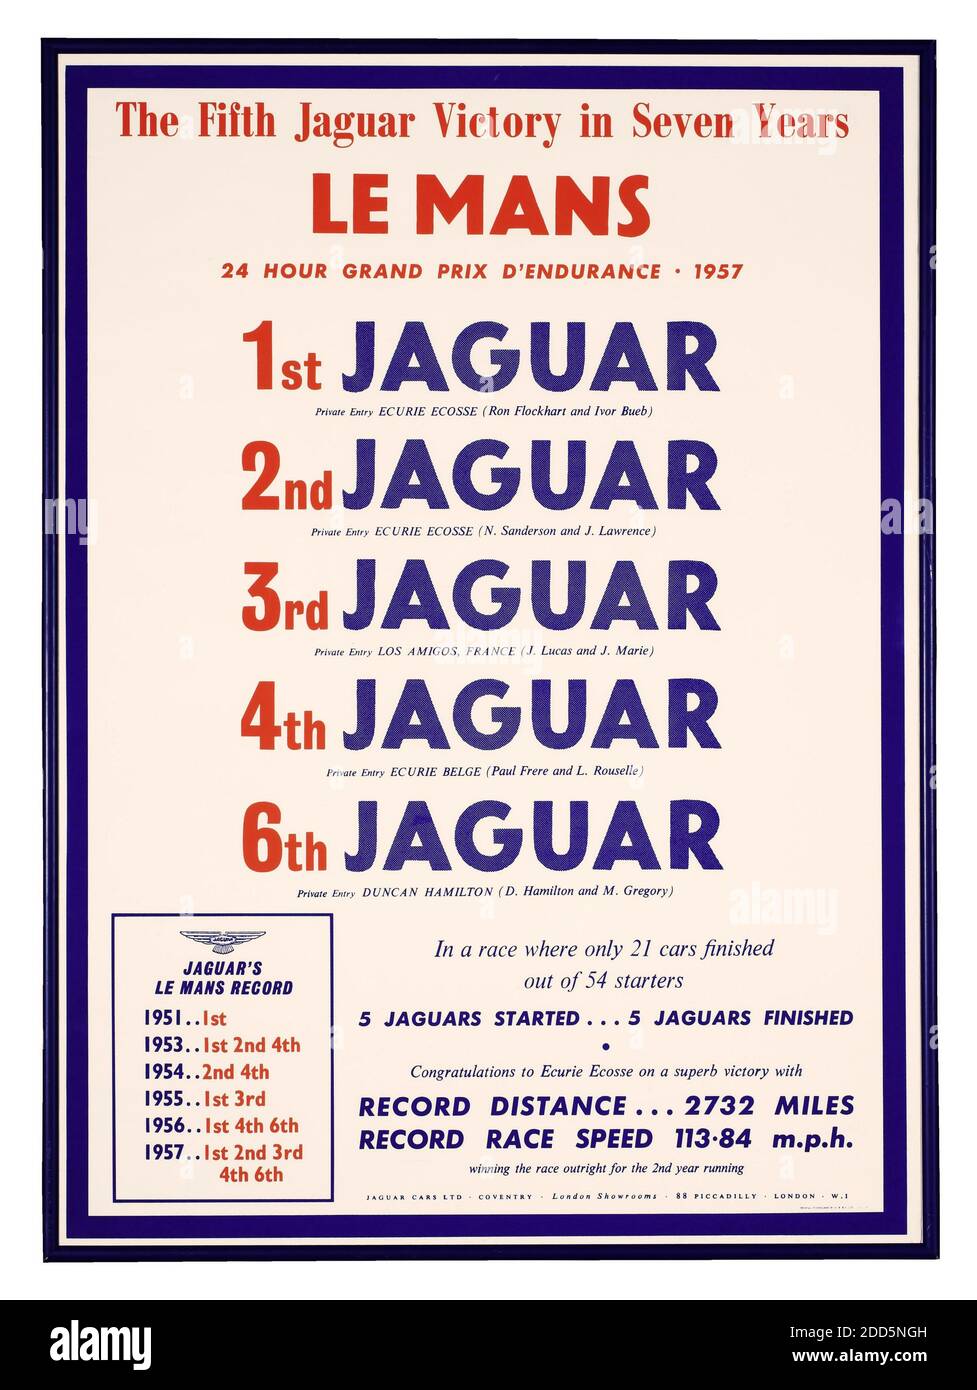 JAGUAR Vintage 1957 Le Mans 24 hrs race with Jaguar victories 1st to 6th 'The Fifth Jaguar Victory in Seven Years', Les Mans, poster printed in England by B & S Ltd for Jaguar Cars Limited 1957 - 2732 miles race speed average 113.84 mph Stock Photo